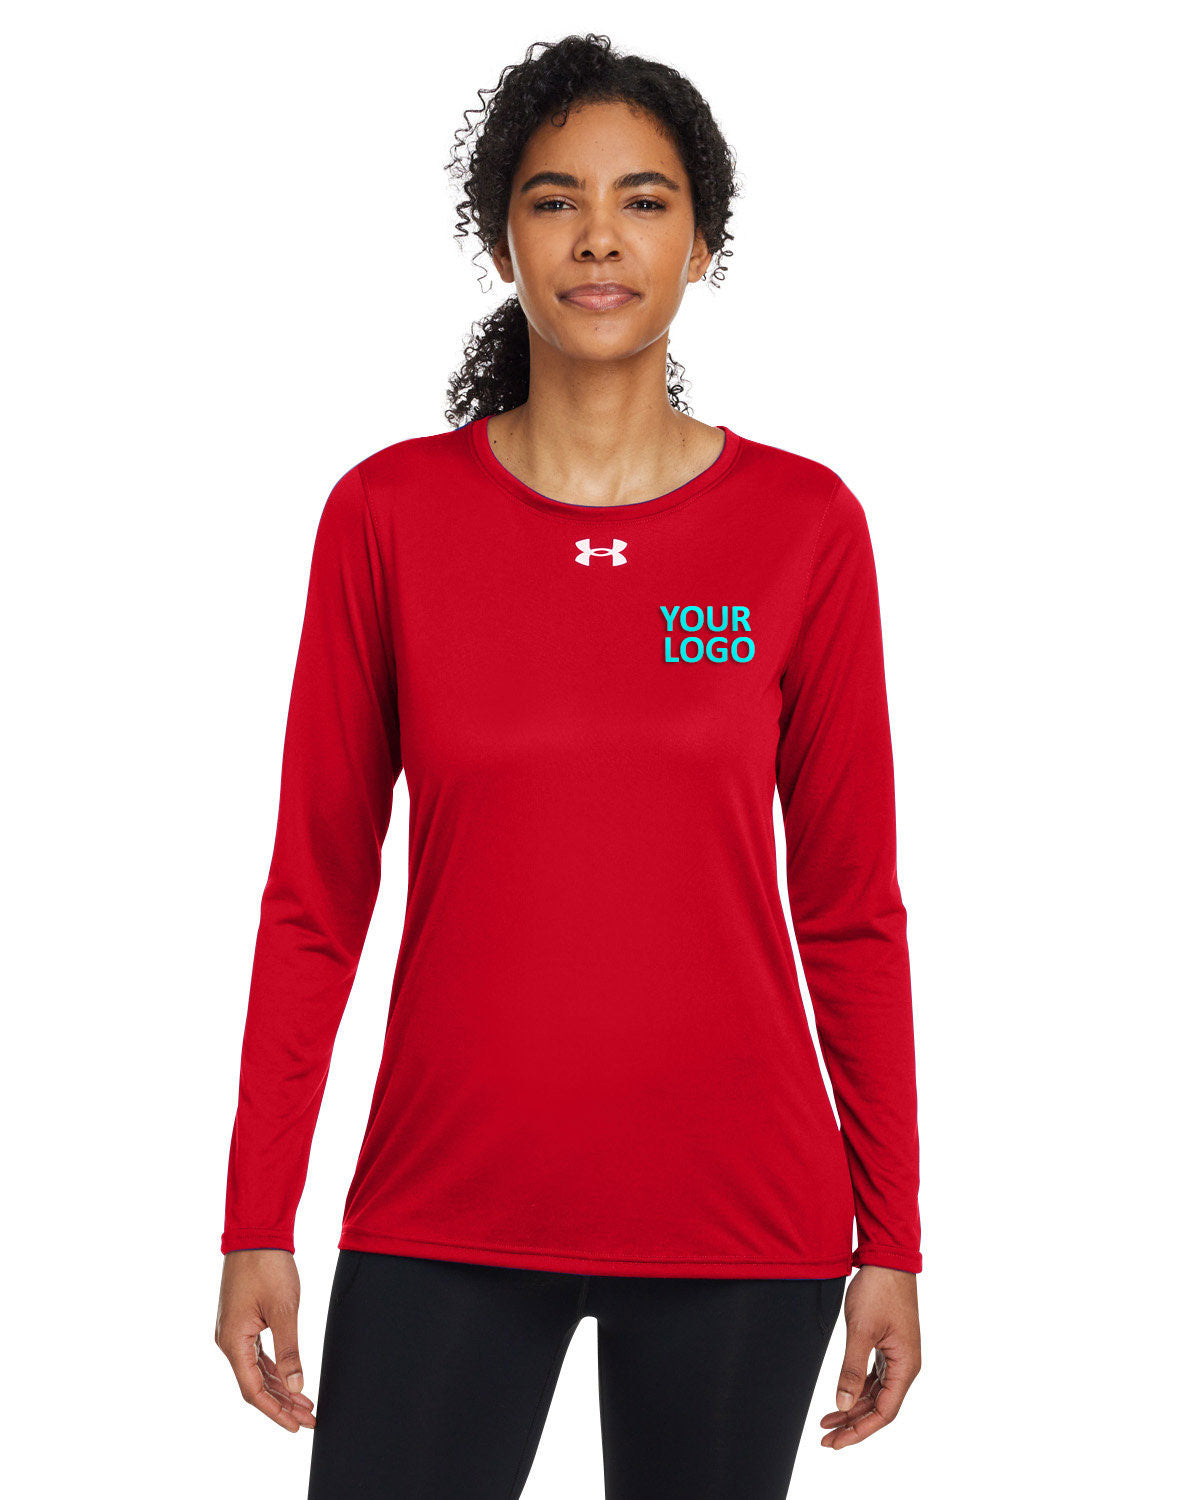 Under Armour Ladies Tech Long-Sleeve Customized T-Shirts, Red